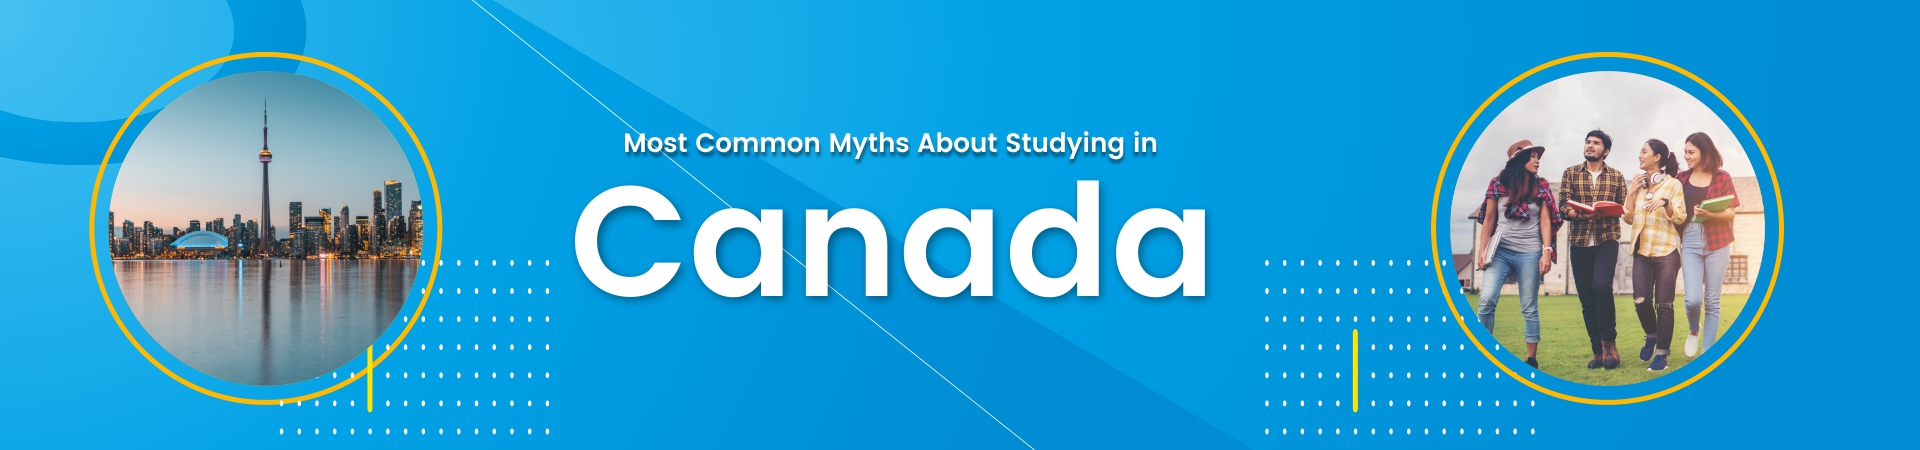 Most common myths about studying in Canada